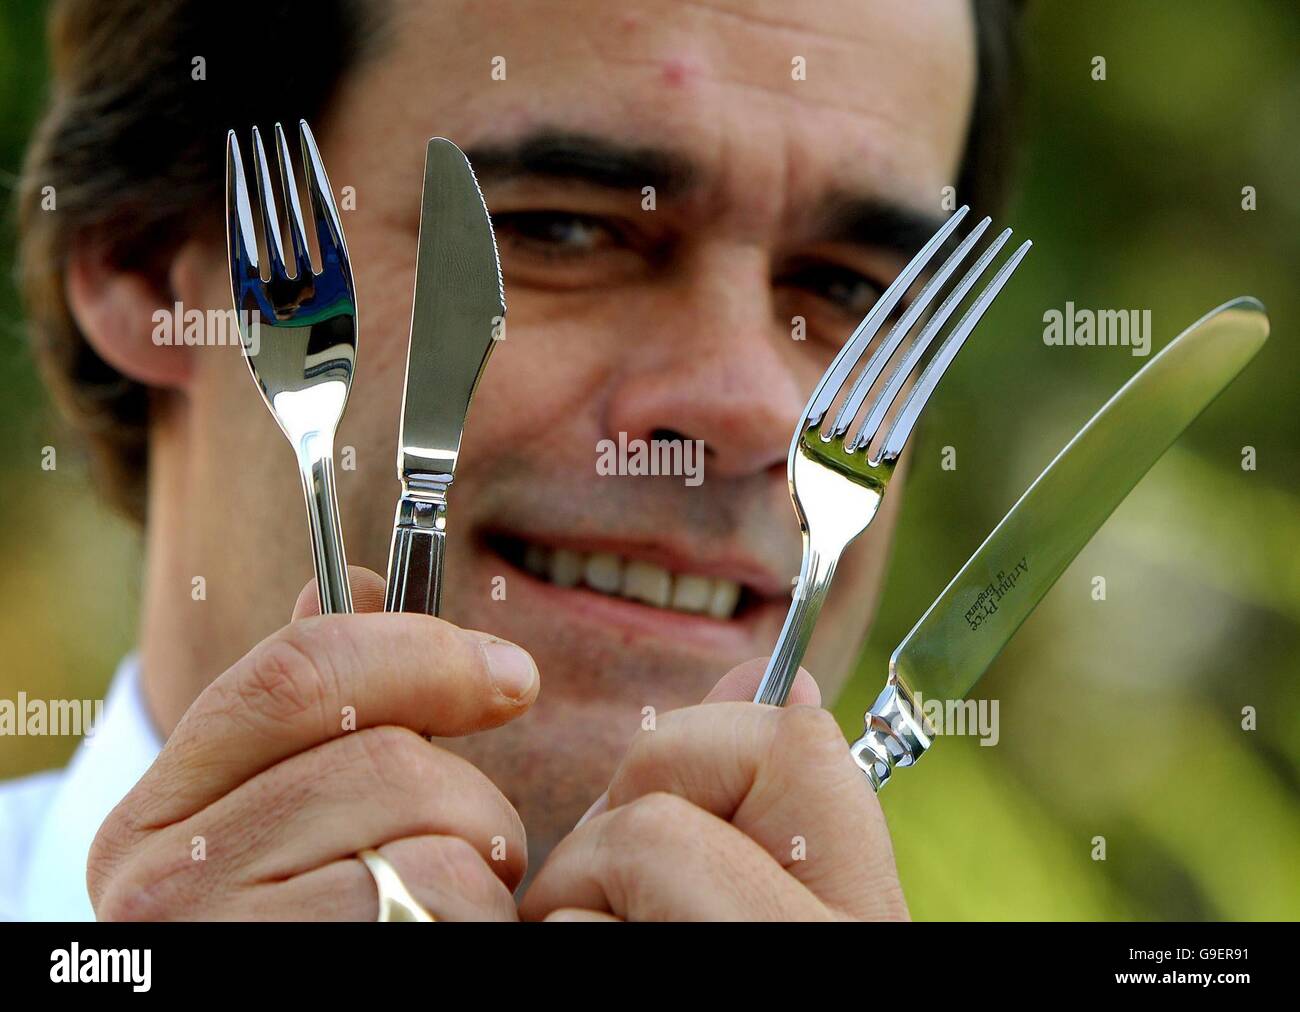 Simon Price, Chief Executive of Arthur Price knives with their new anti-terror cutlery (left) compared with standard cutlery (right). Stock Photo